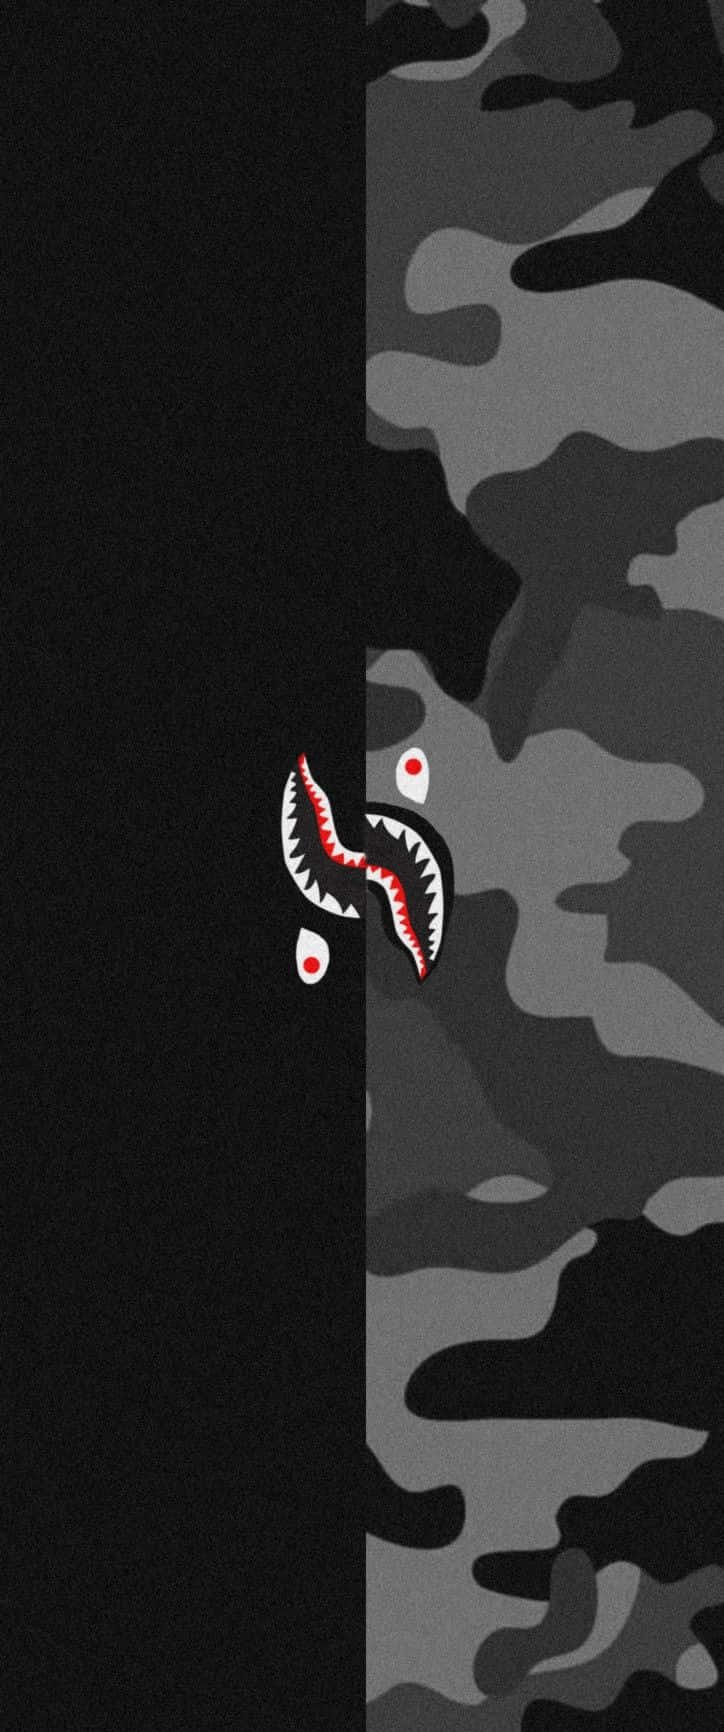 Upgrade Your Style with the BAPE IPhone Wallpaper